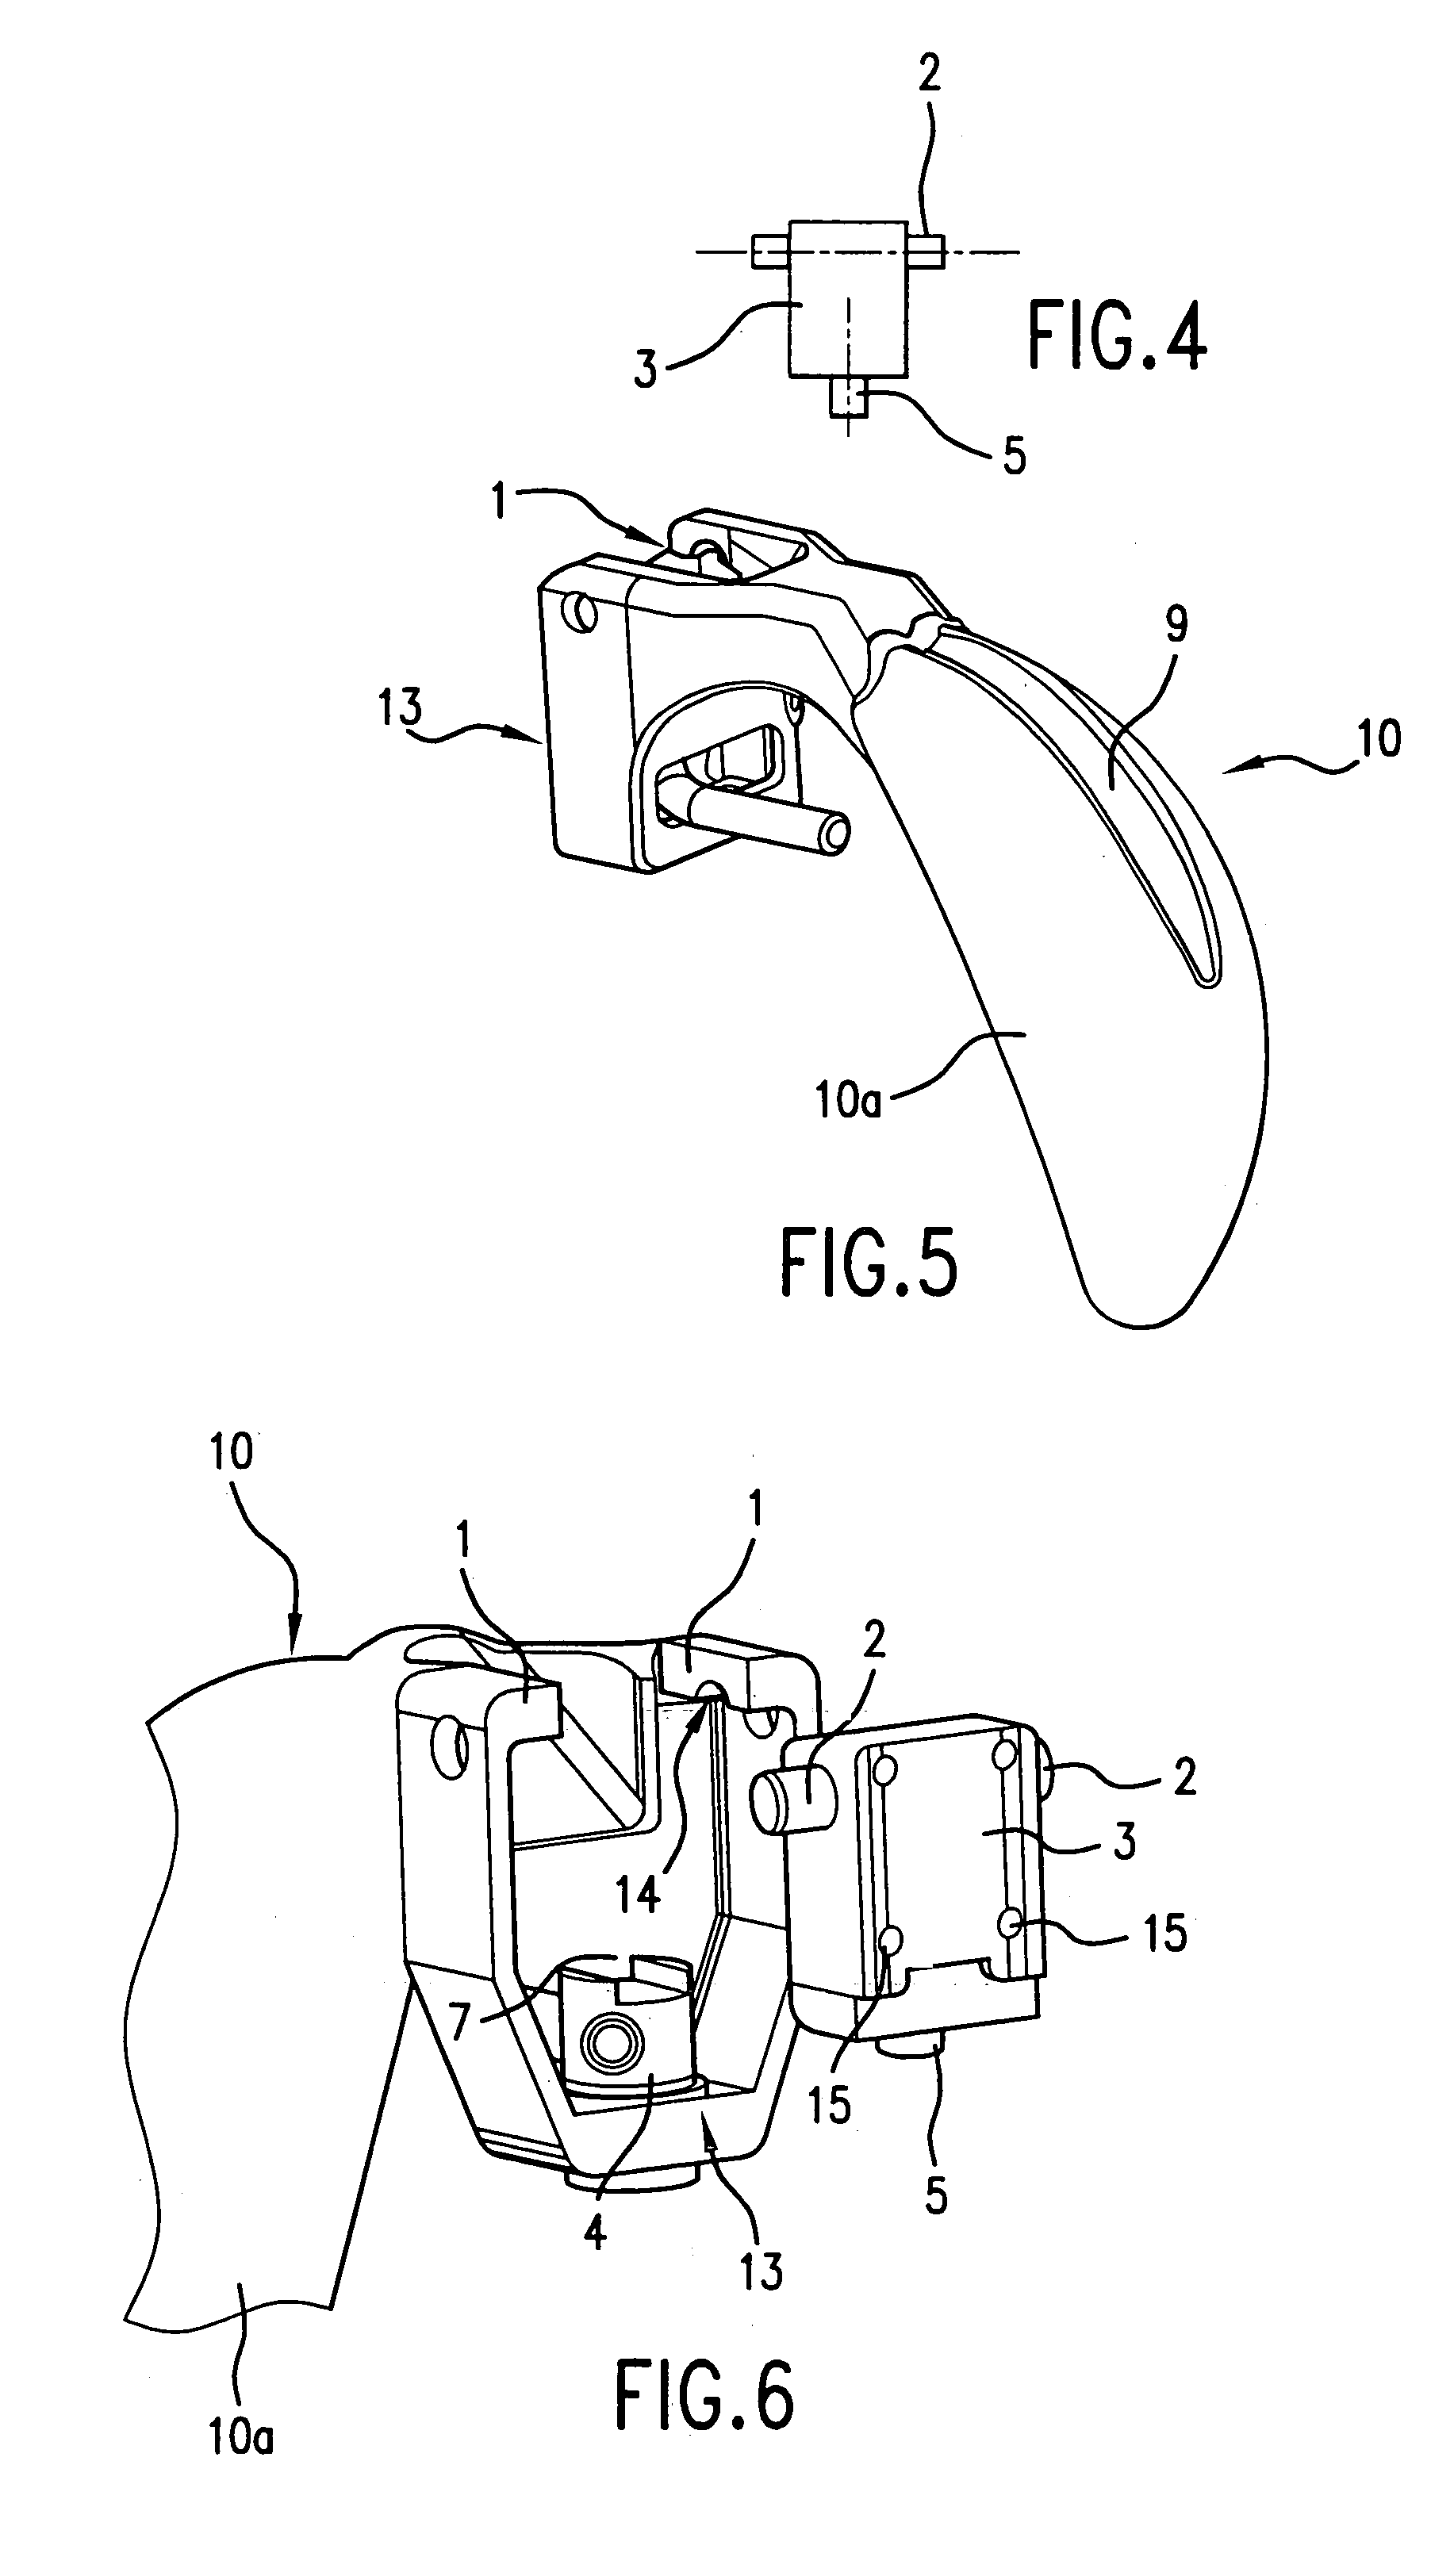 Microscope with a handle and/or hand-grip for a microscope